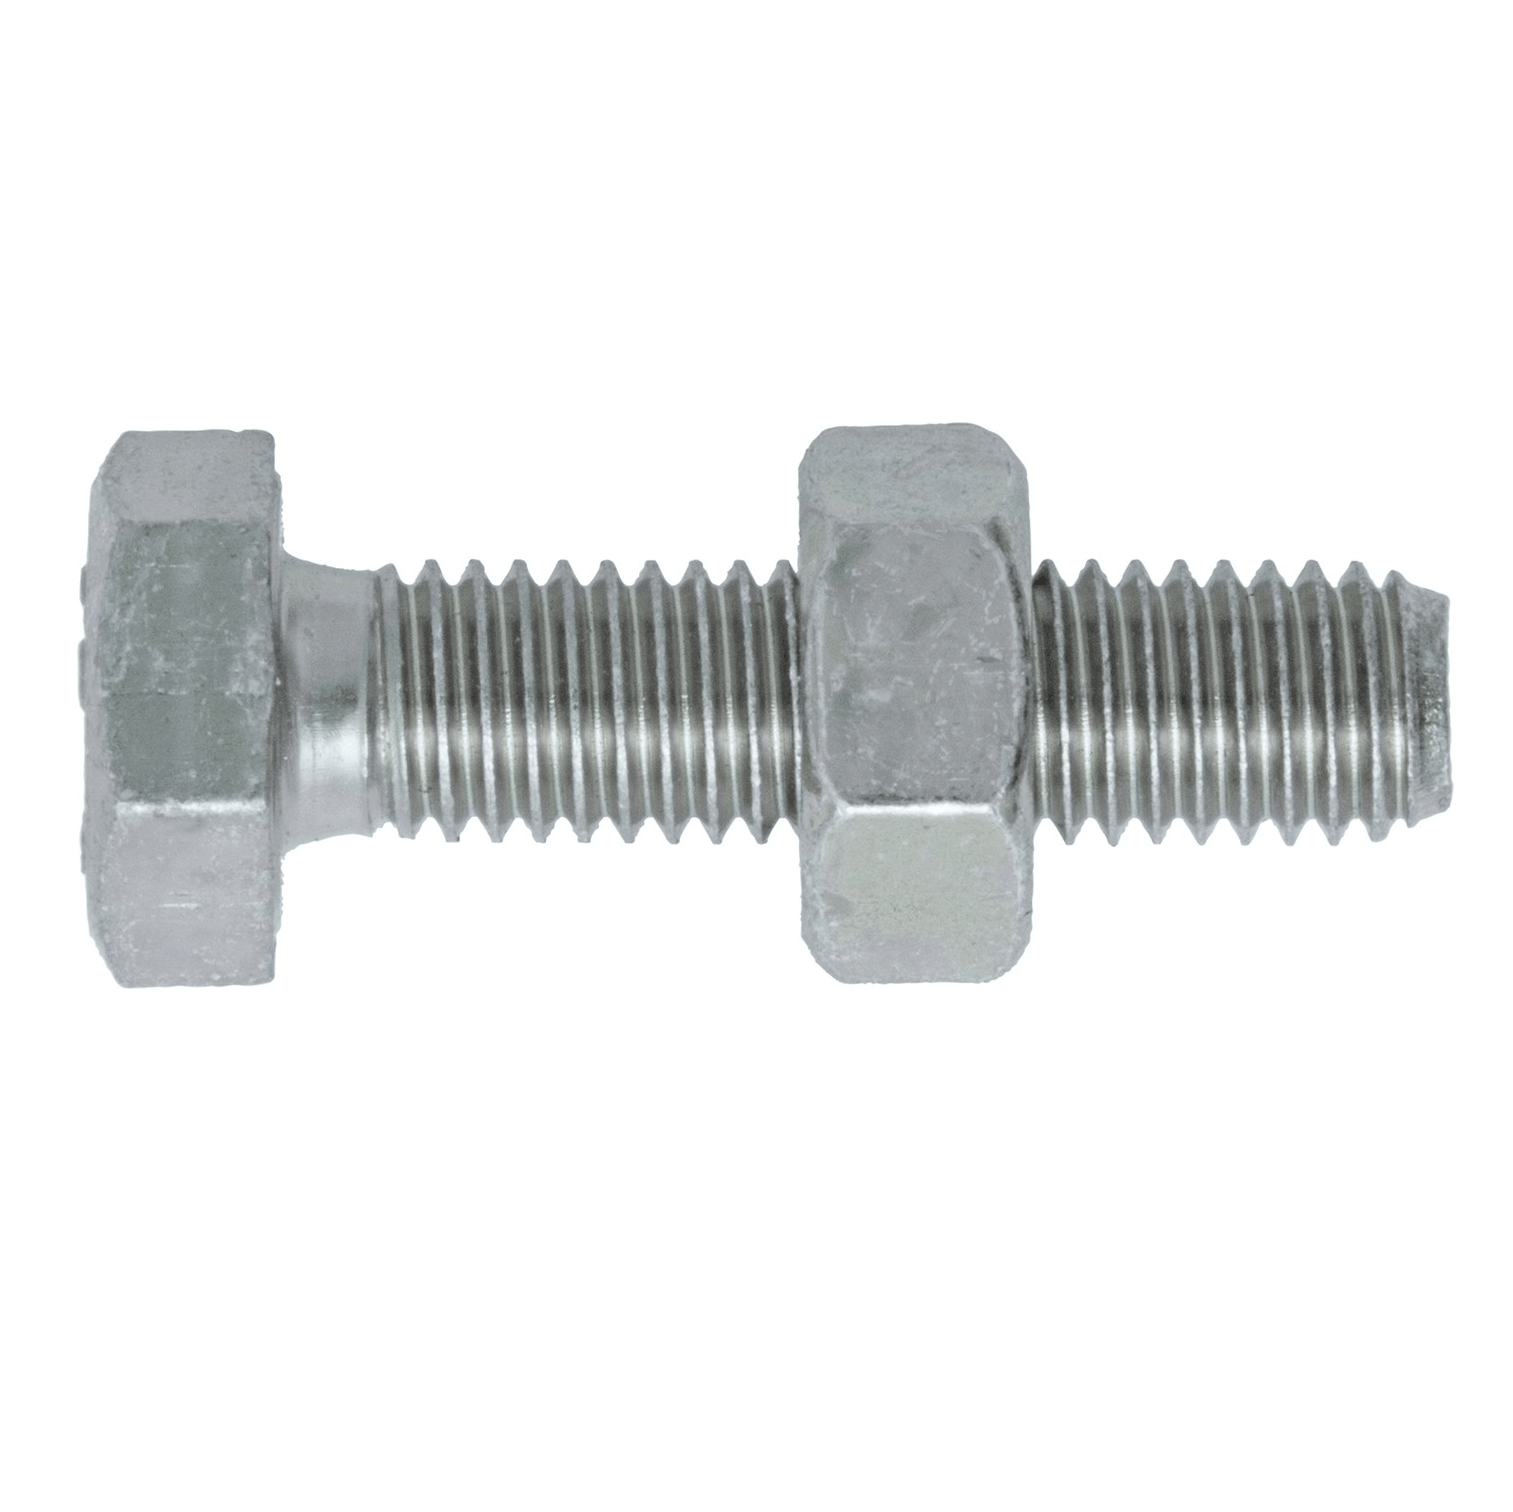 Assorted Set Screws with Nuts M8 – 200 Pieces